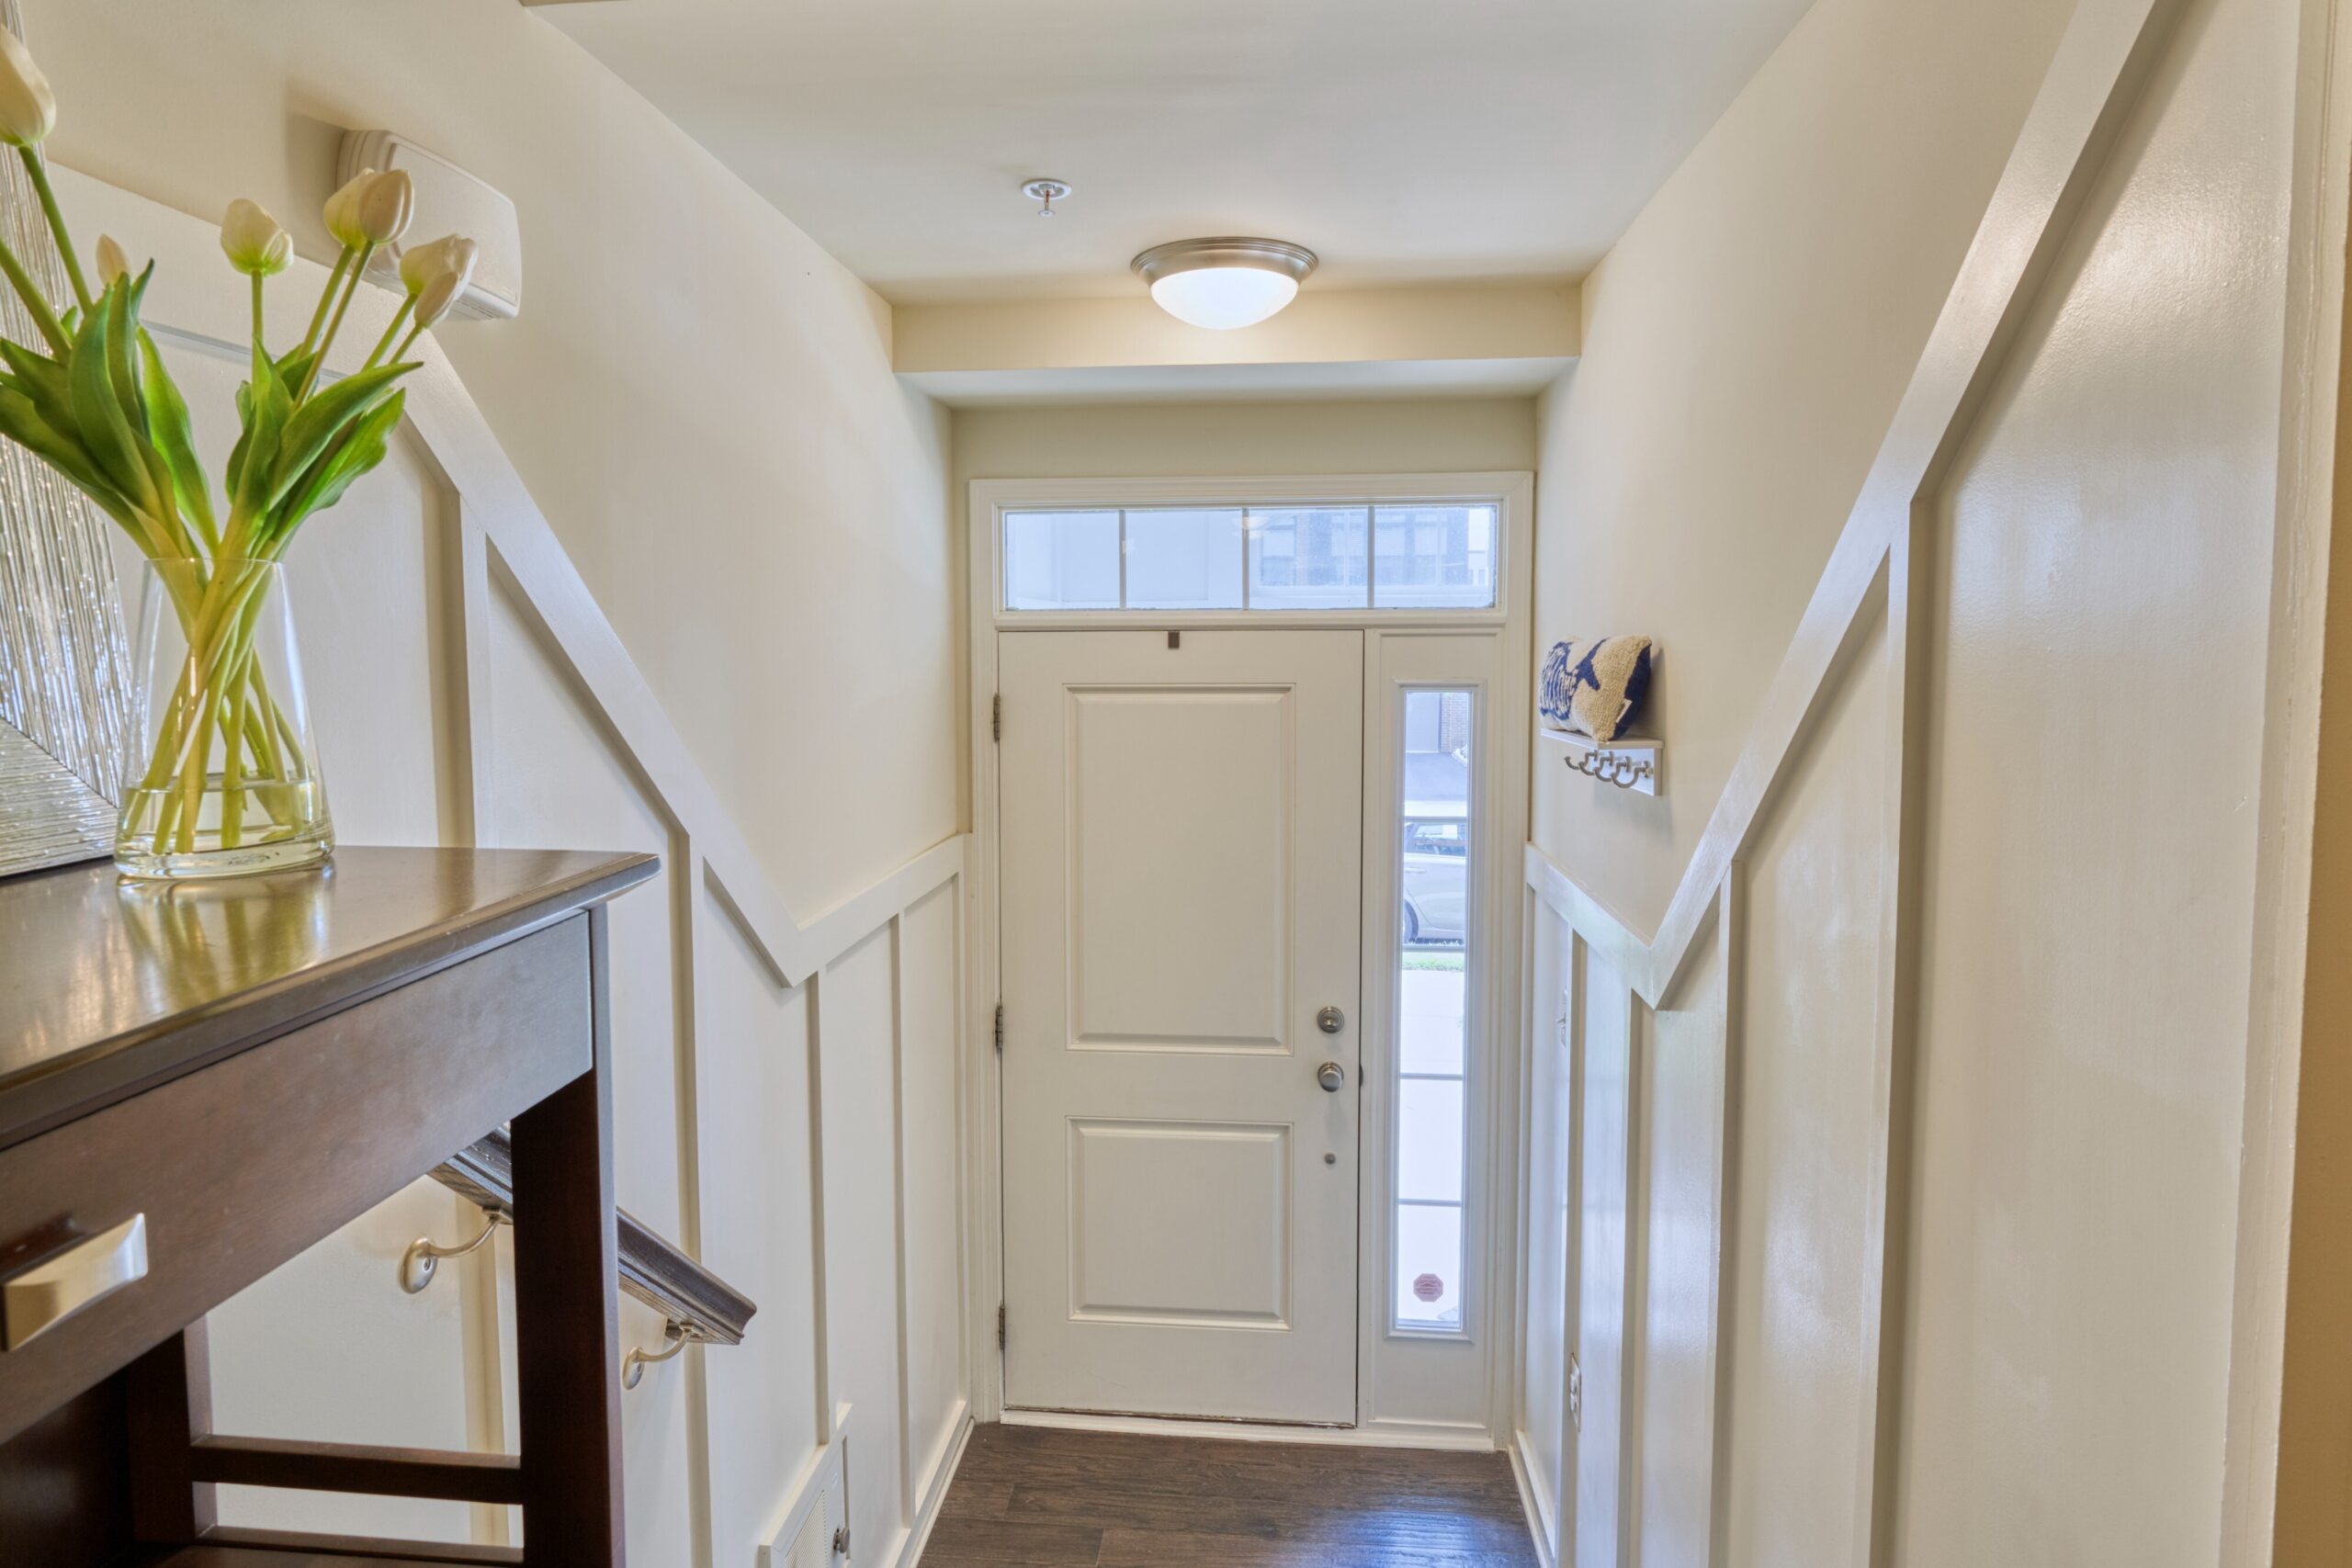 Professional interior photo of 23560 Buckland Farm Ter, Ashburn, VA - Showing the front entry hall with stairs leading up to the main level and white wainscoting against white walls